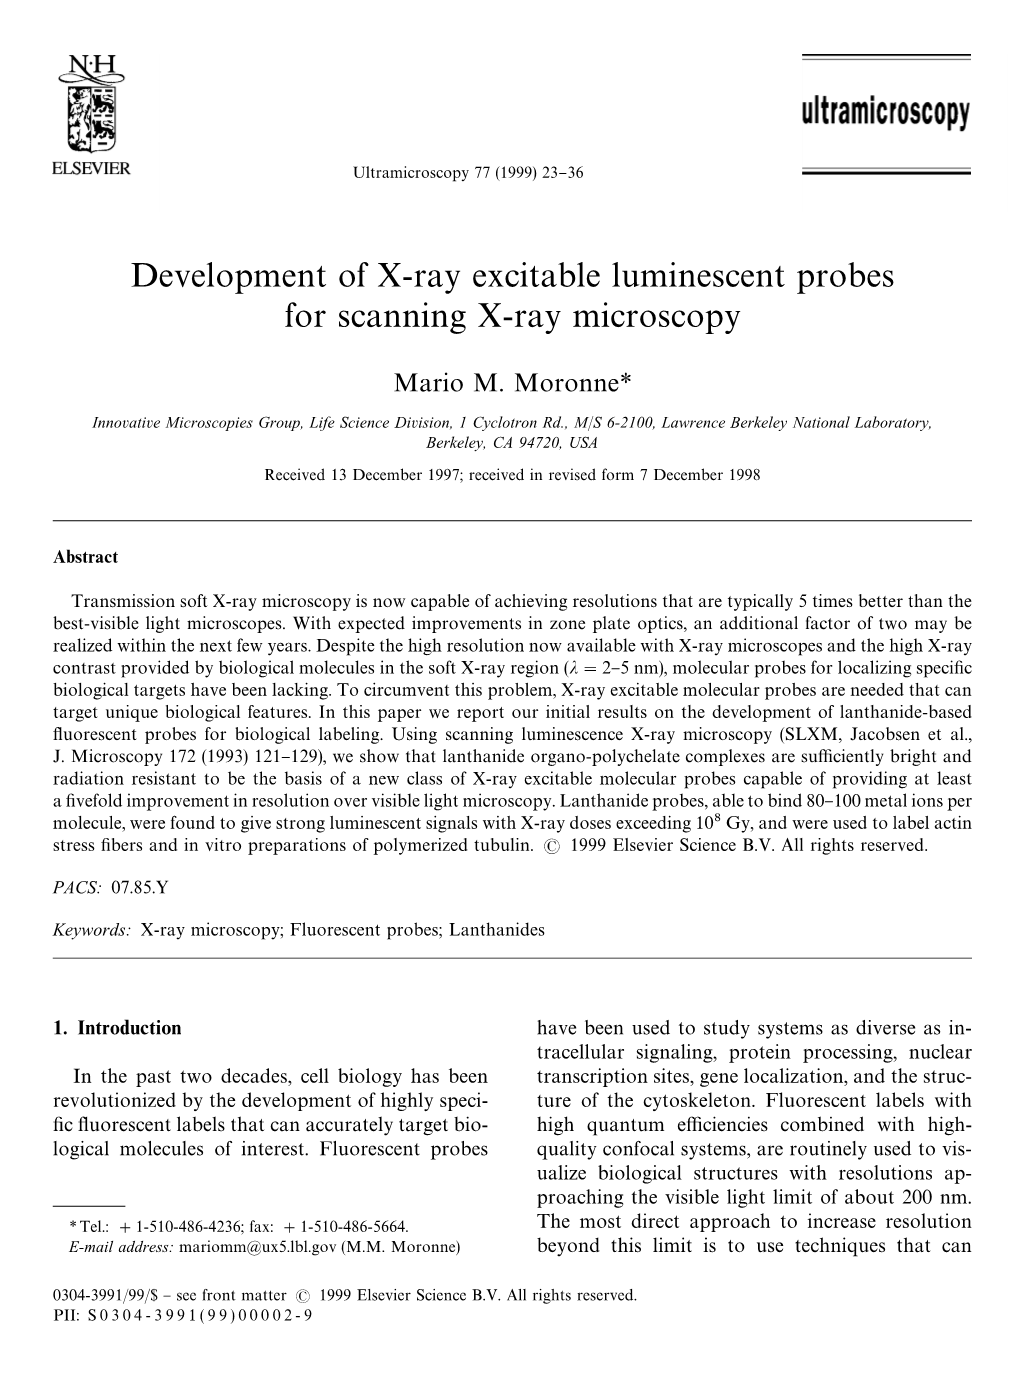 Development of X-Ray Excitable Luminescent Probes for Scanning X-Ray Microscopy